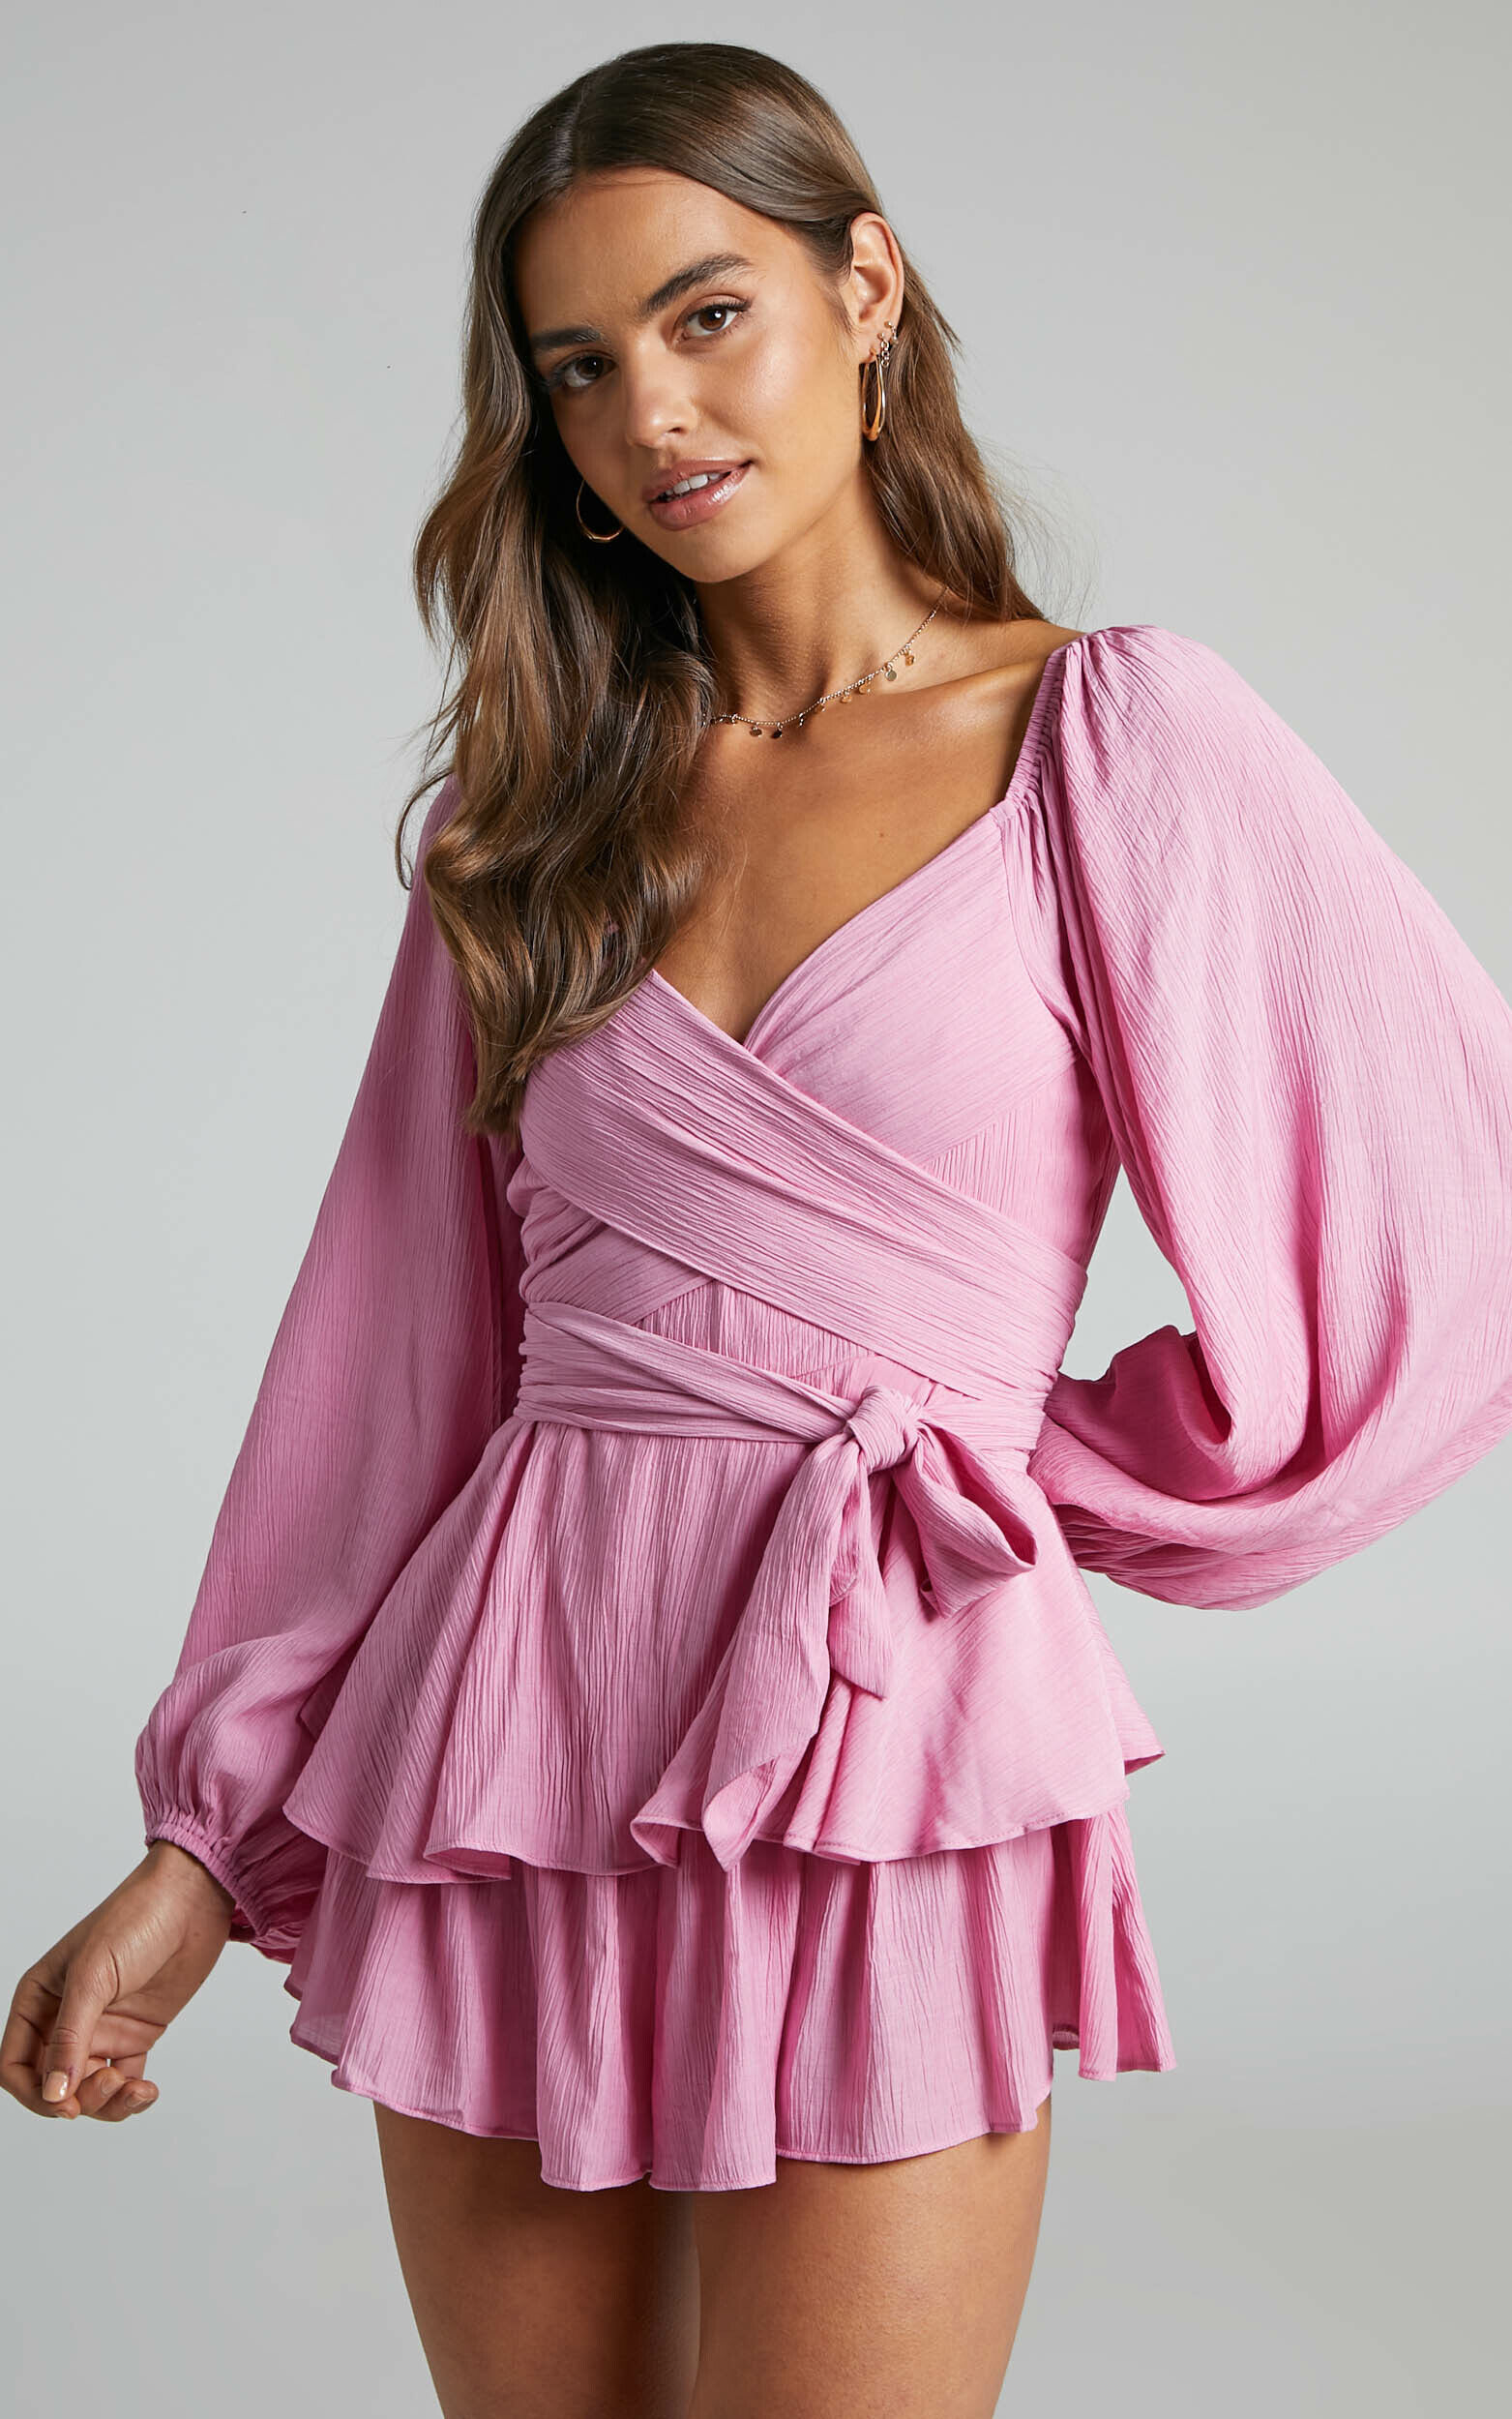 Florice Playsuit - Wrap Front Frill Playsuit in Pink - 04, PNK3